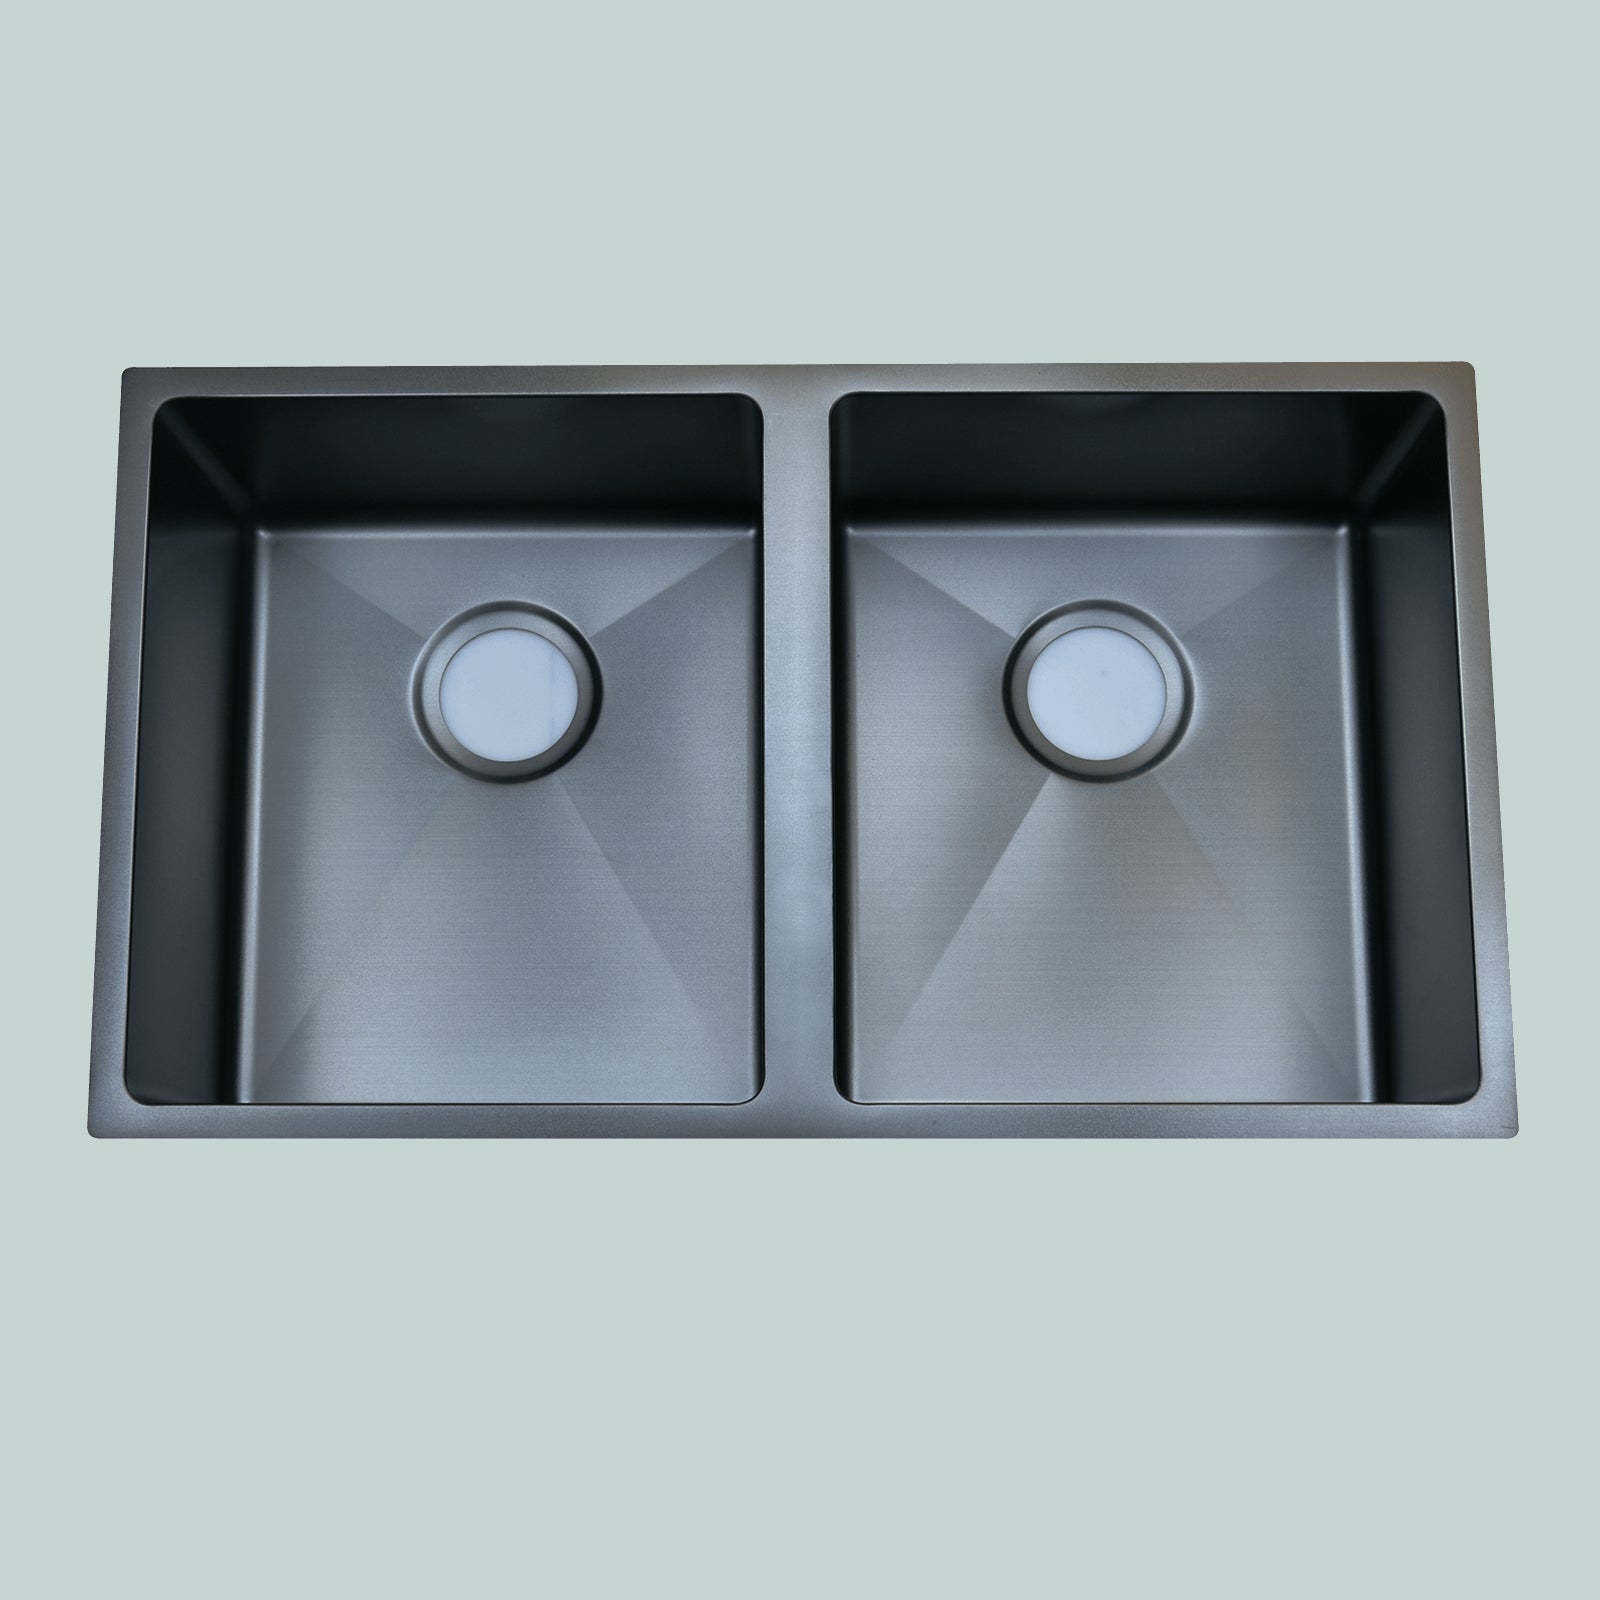 ECT Global Double Bowl Undercounter Sink - Stainless Steel SS7645GB